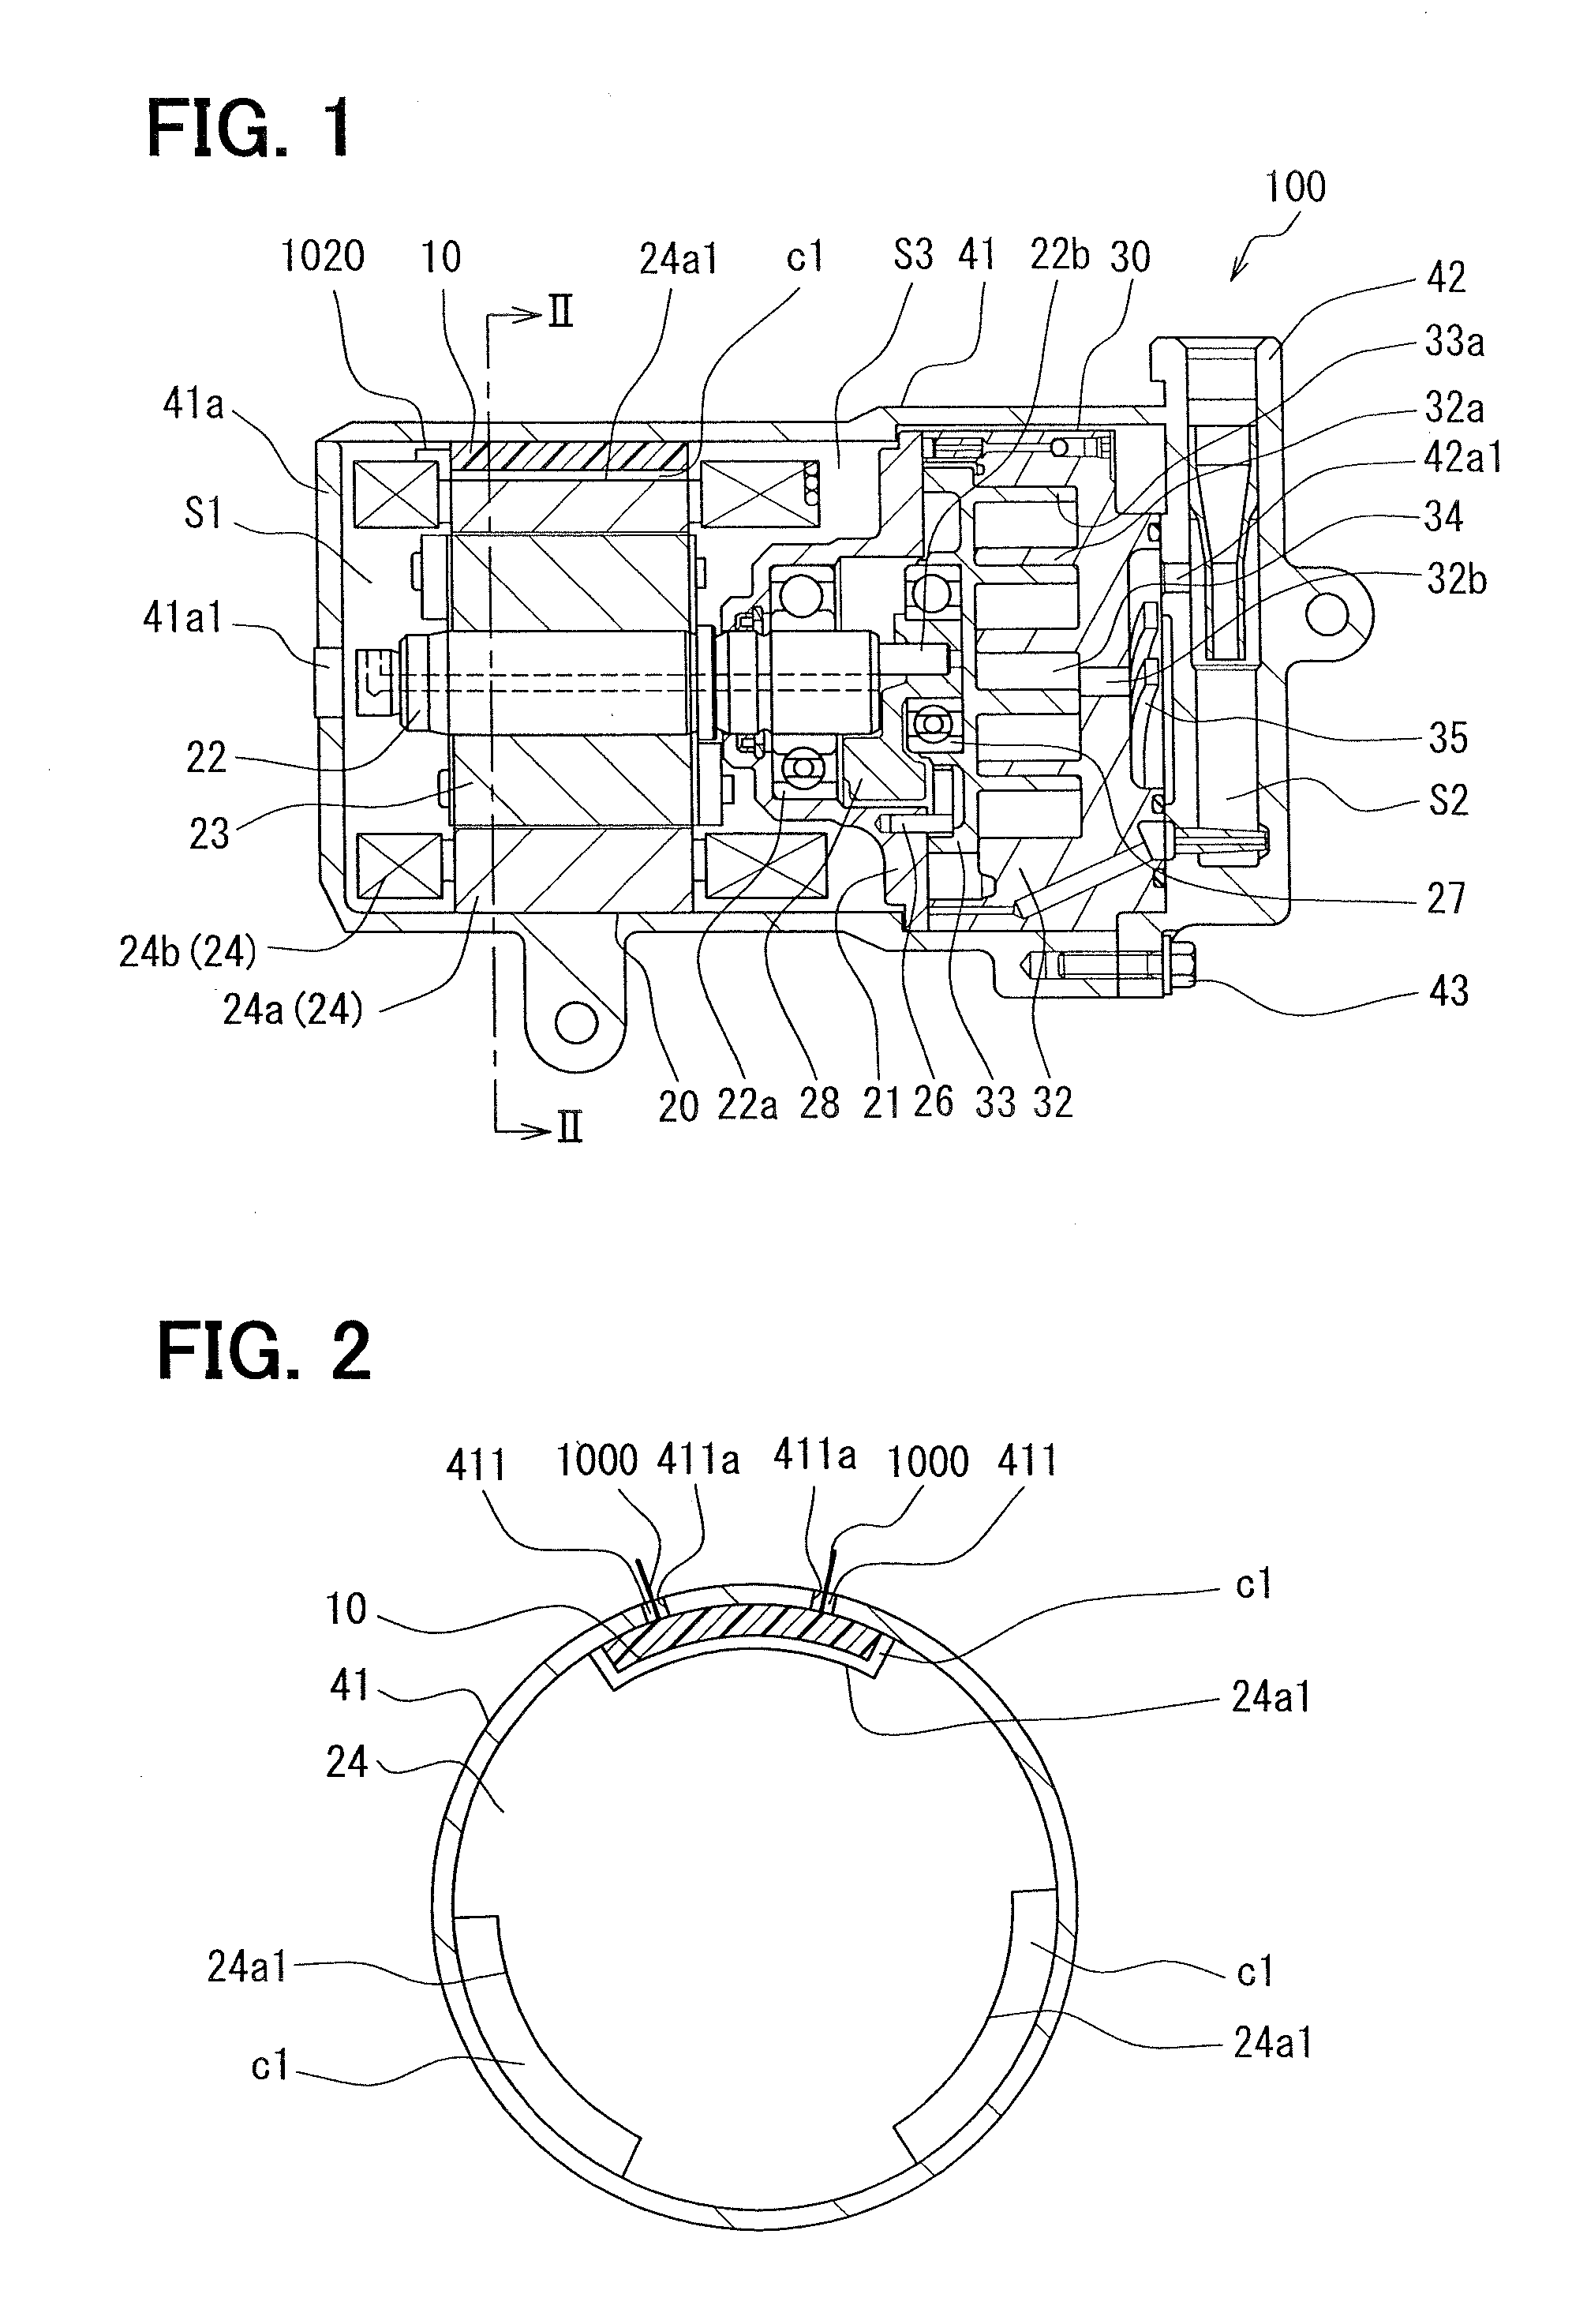 Electric device mounted in electric compressor